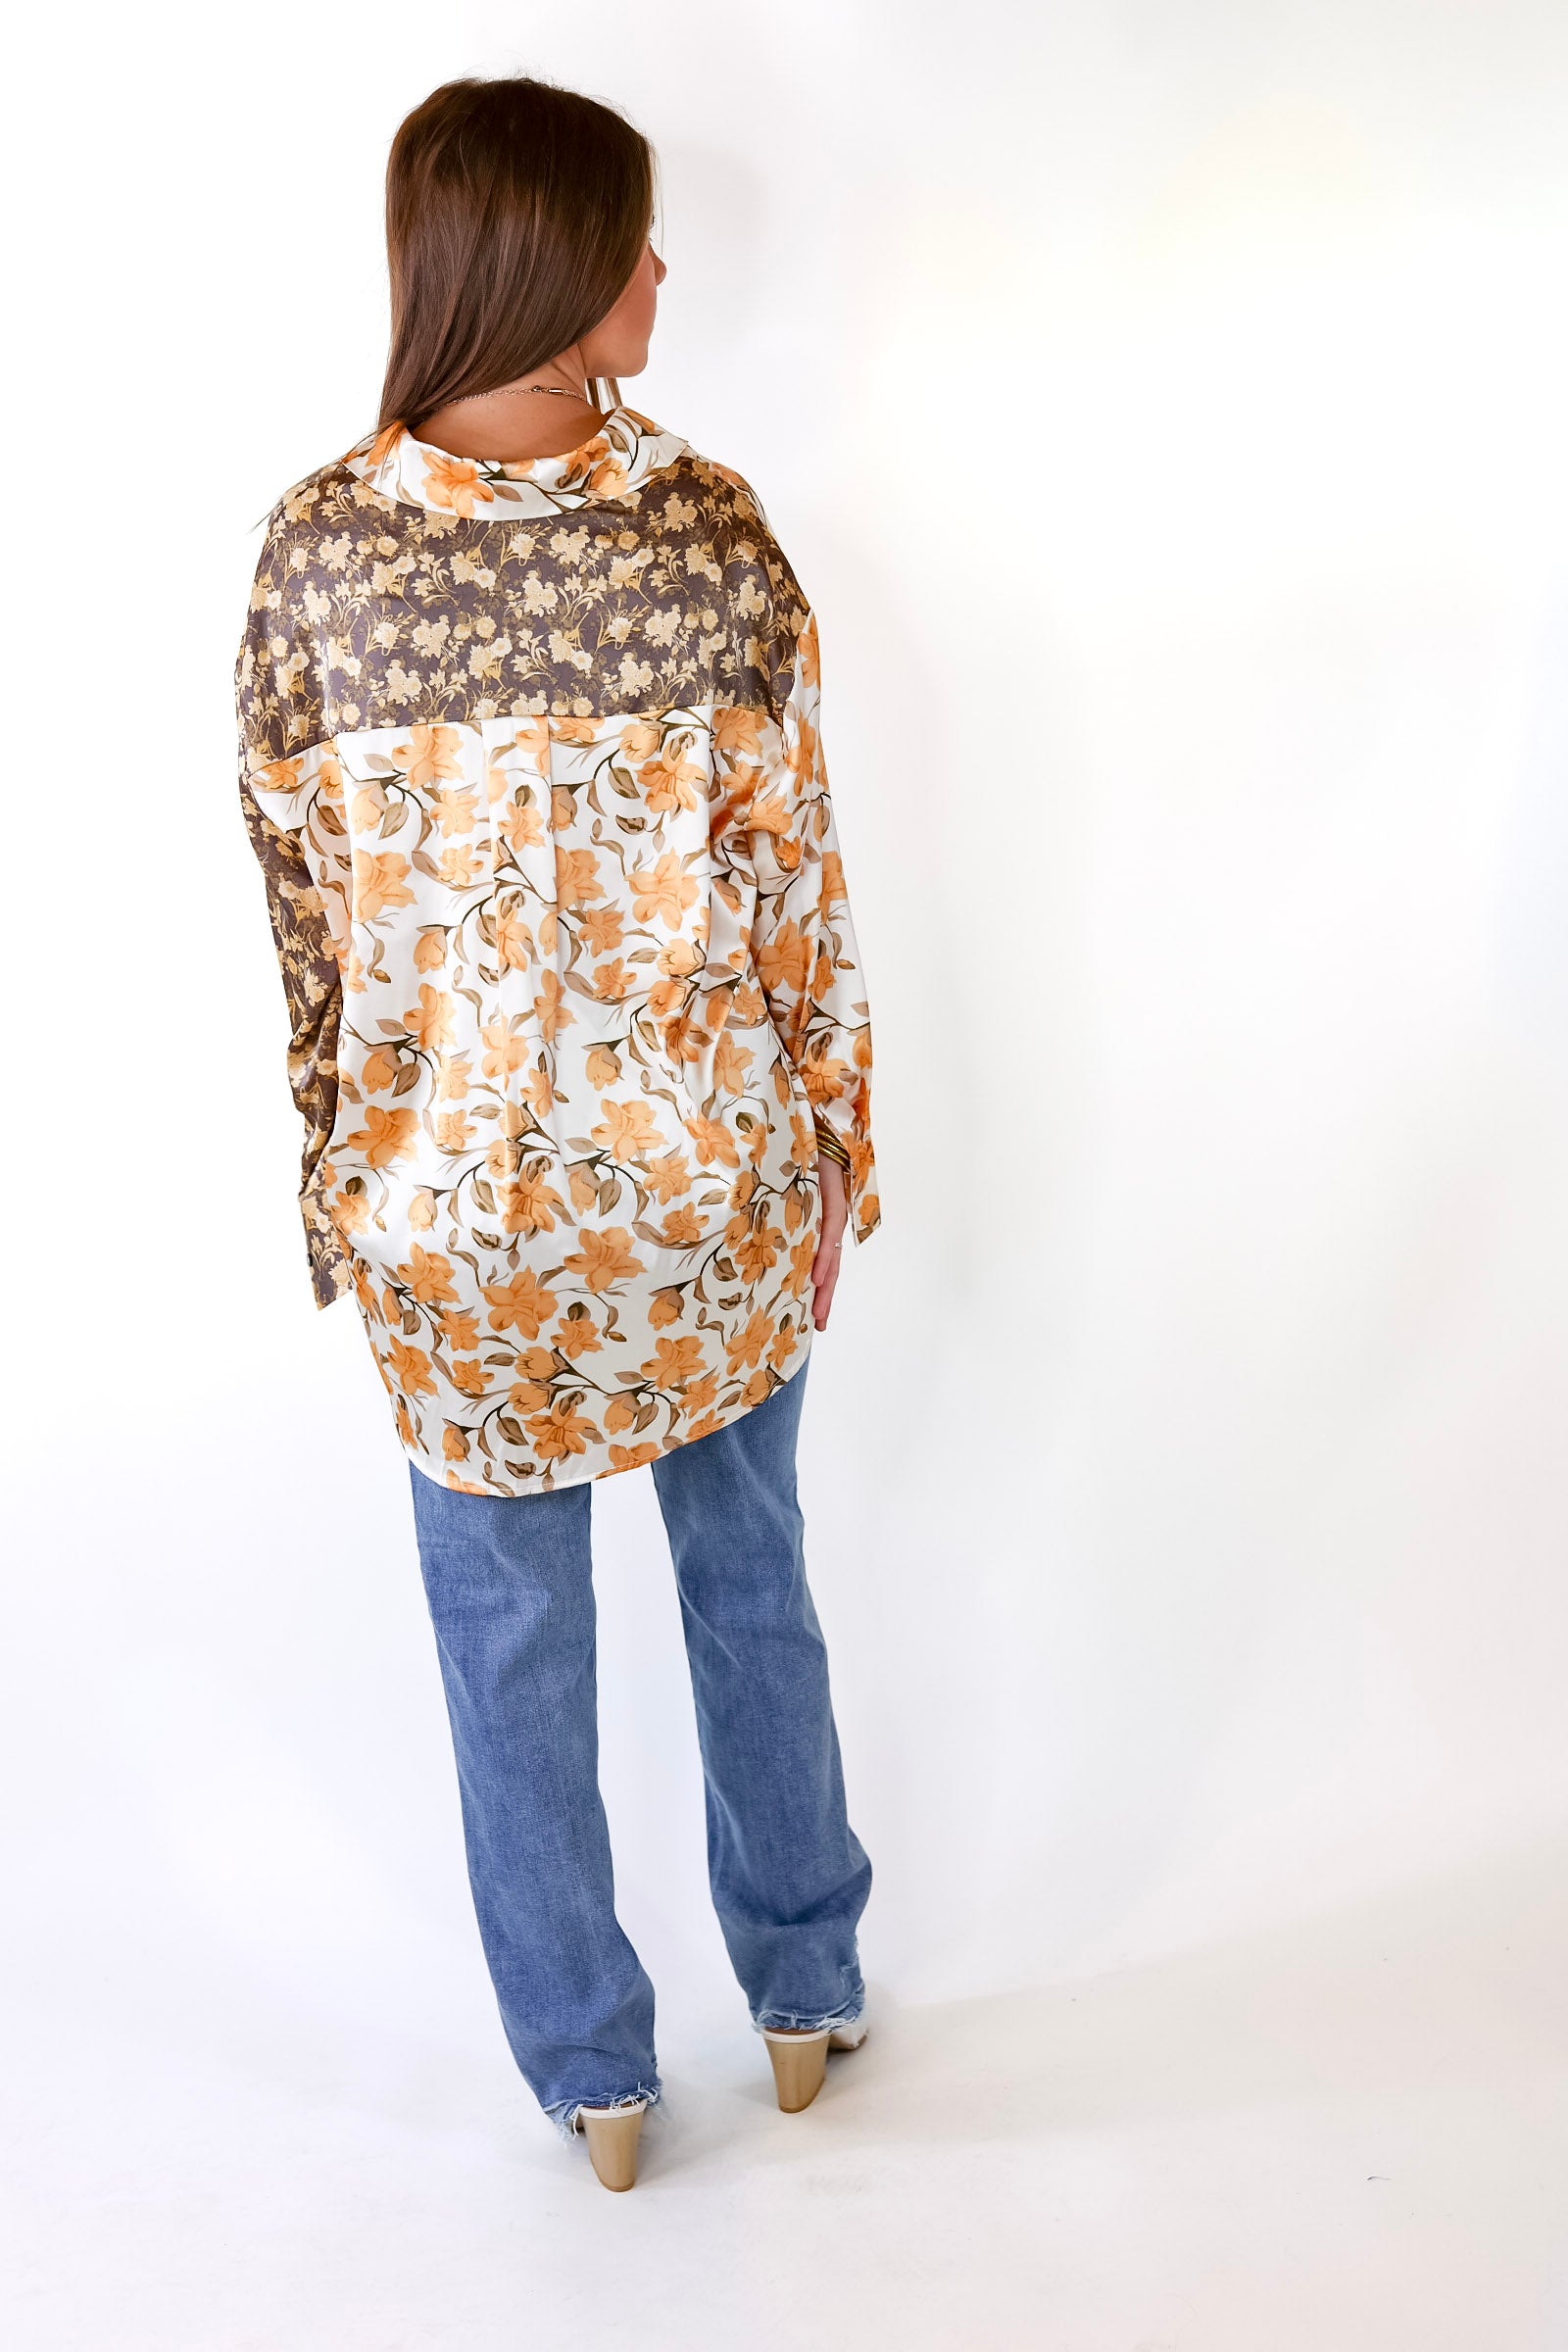 Fall Feels Satin Print Block Top with Long Sleeves in Olive Green and Gold - Giddy Up Glamour Boutique